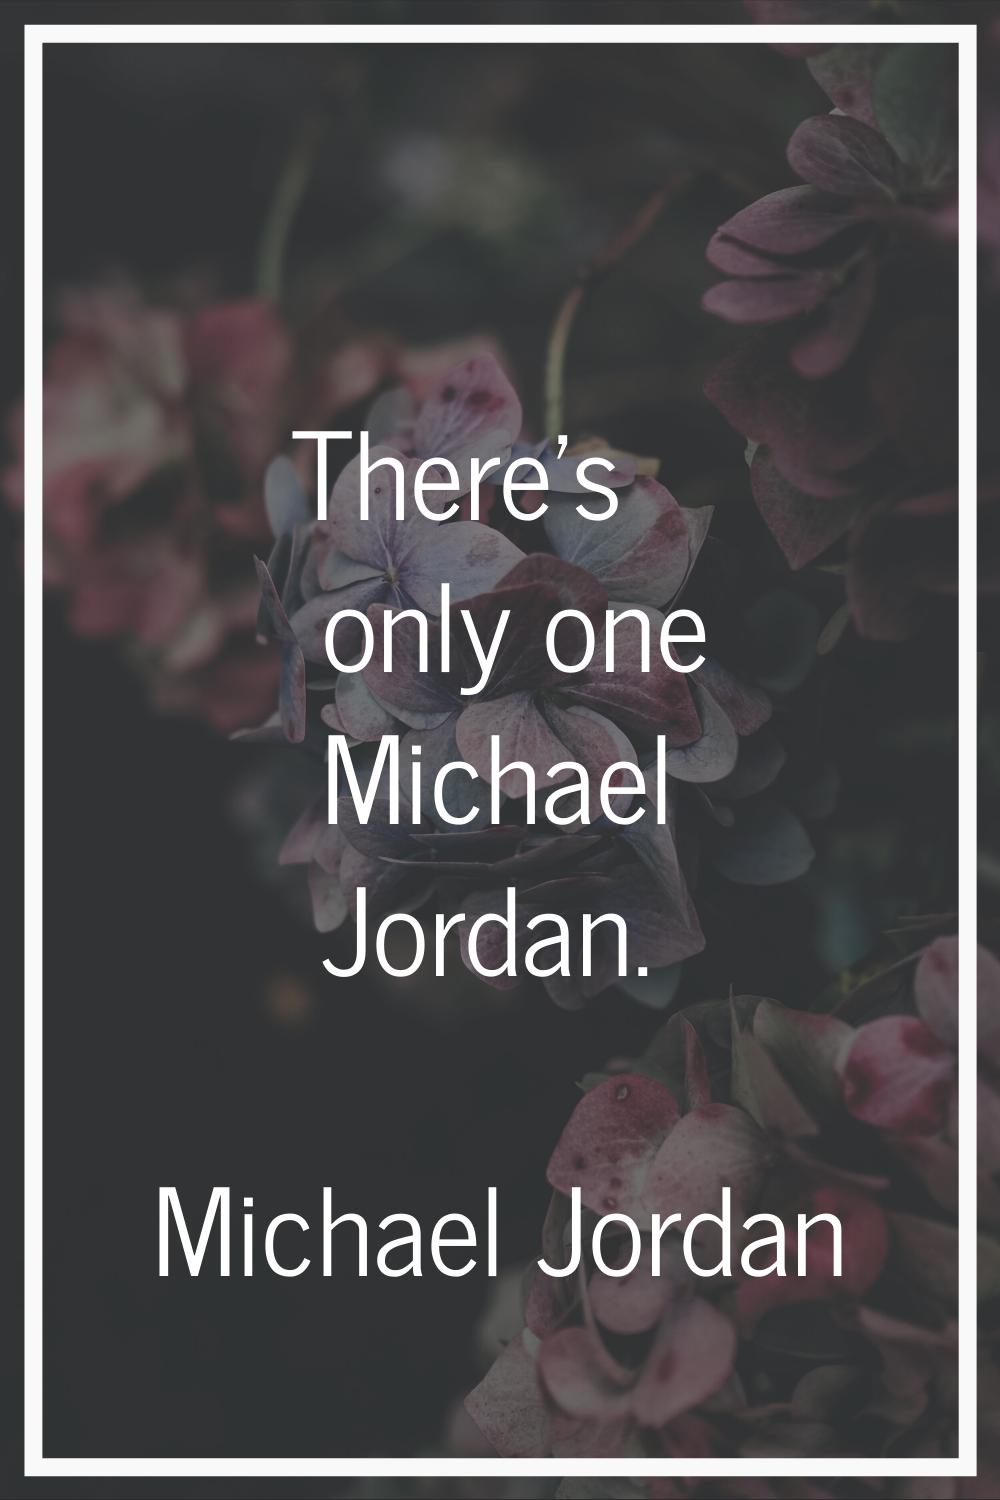 There's only one Michael Jordan.